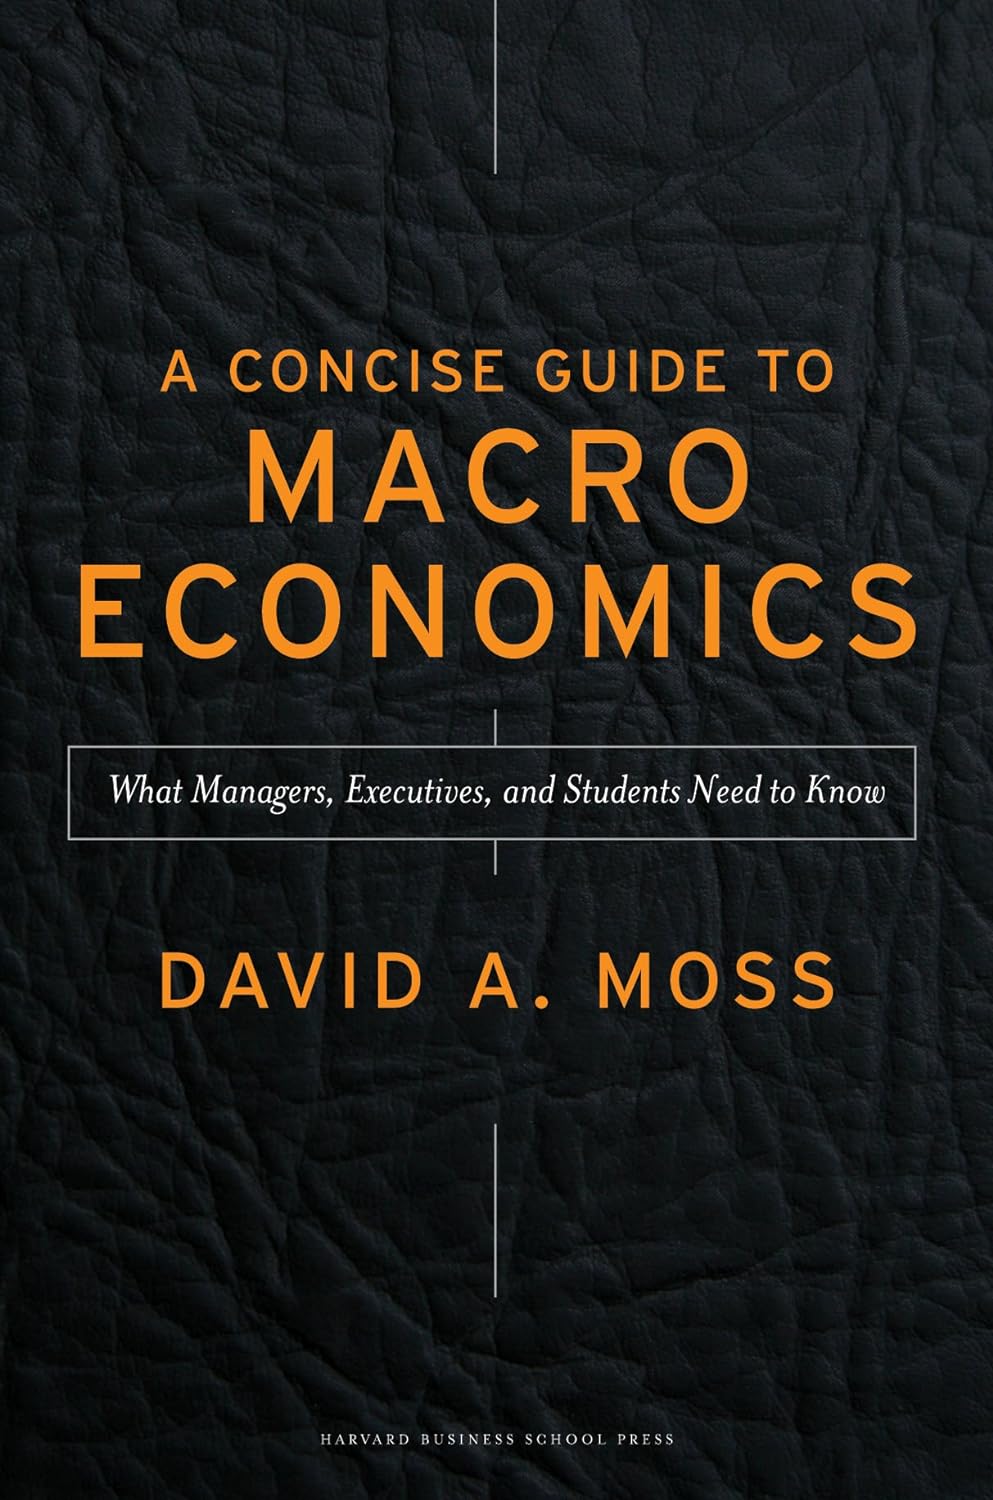 test bank for "A Concise Guide to Macroeconomics by David A. Moss"